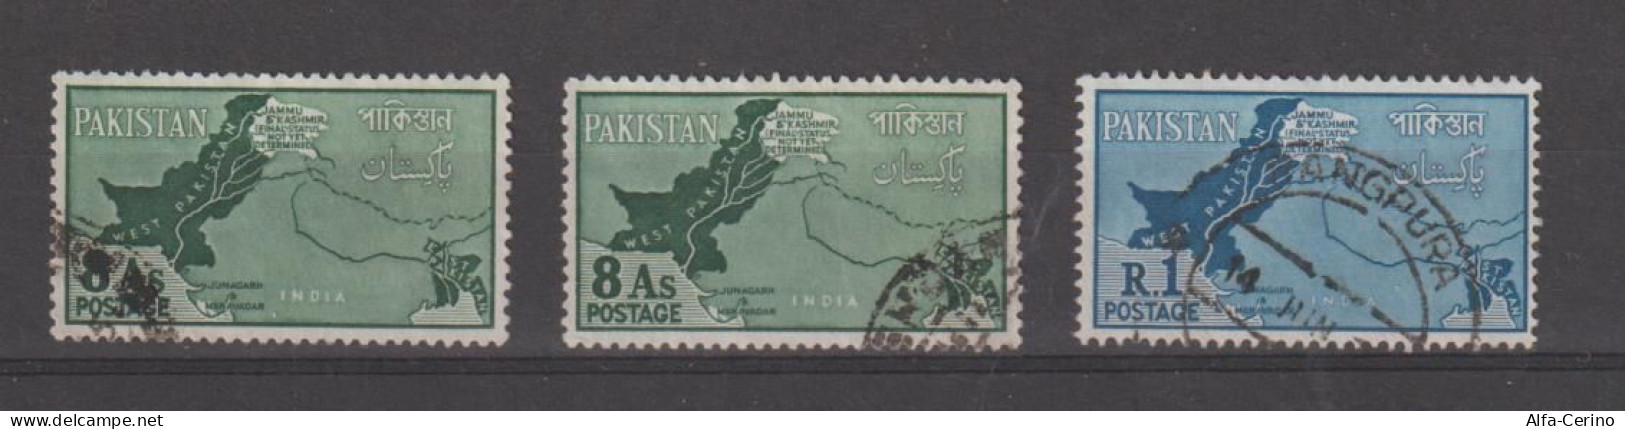 PAKISTAN:  1960   CACHEMIRE  DAY  -  LOT  3  USED  STAMPS  -  YV/TELL. 111 (x2) + 112 - Pakistán